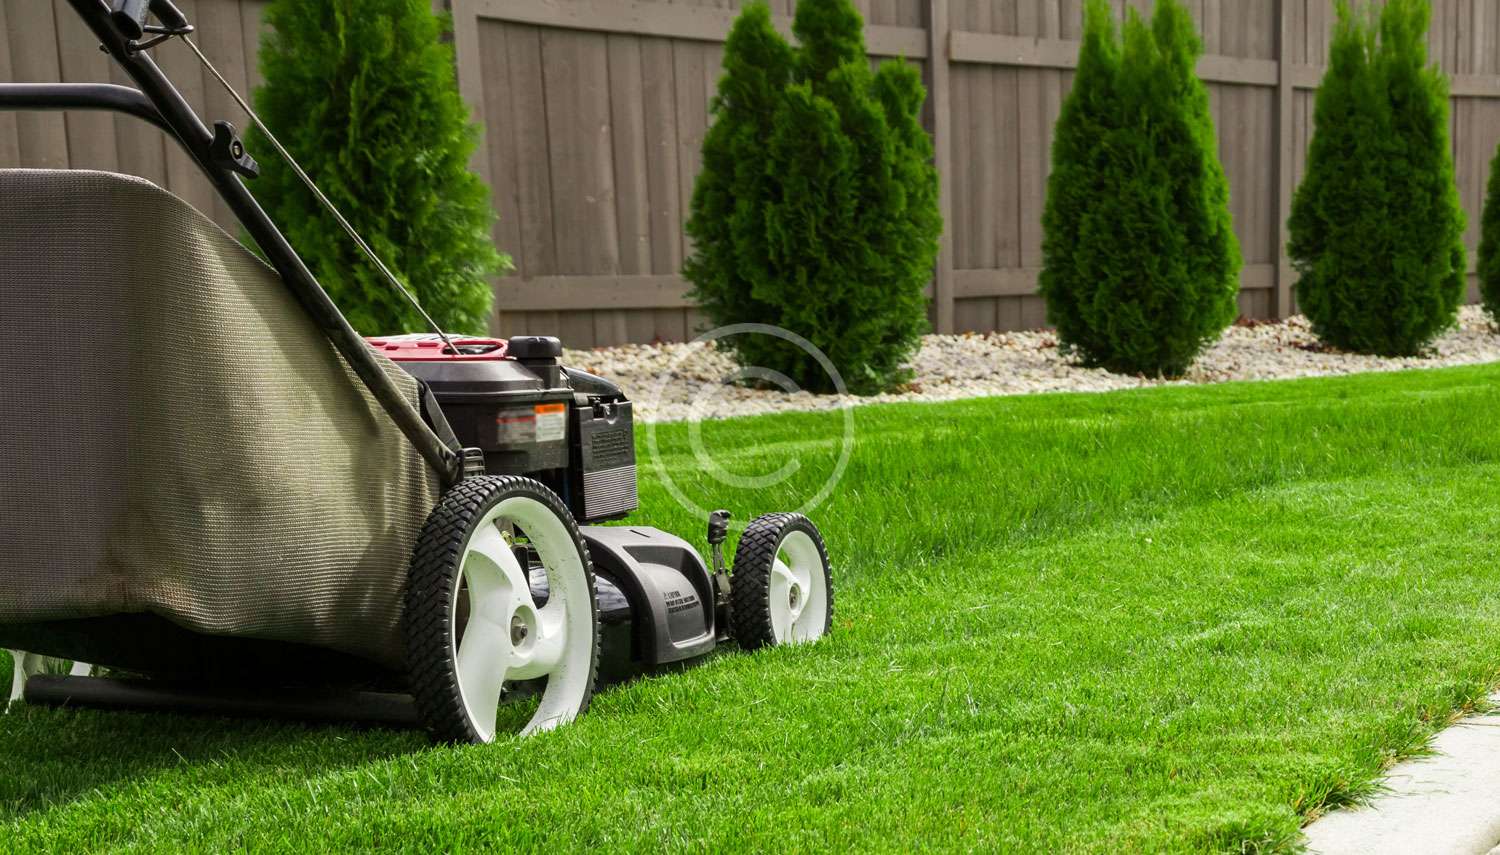 Professional lawn care services